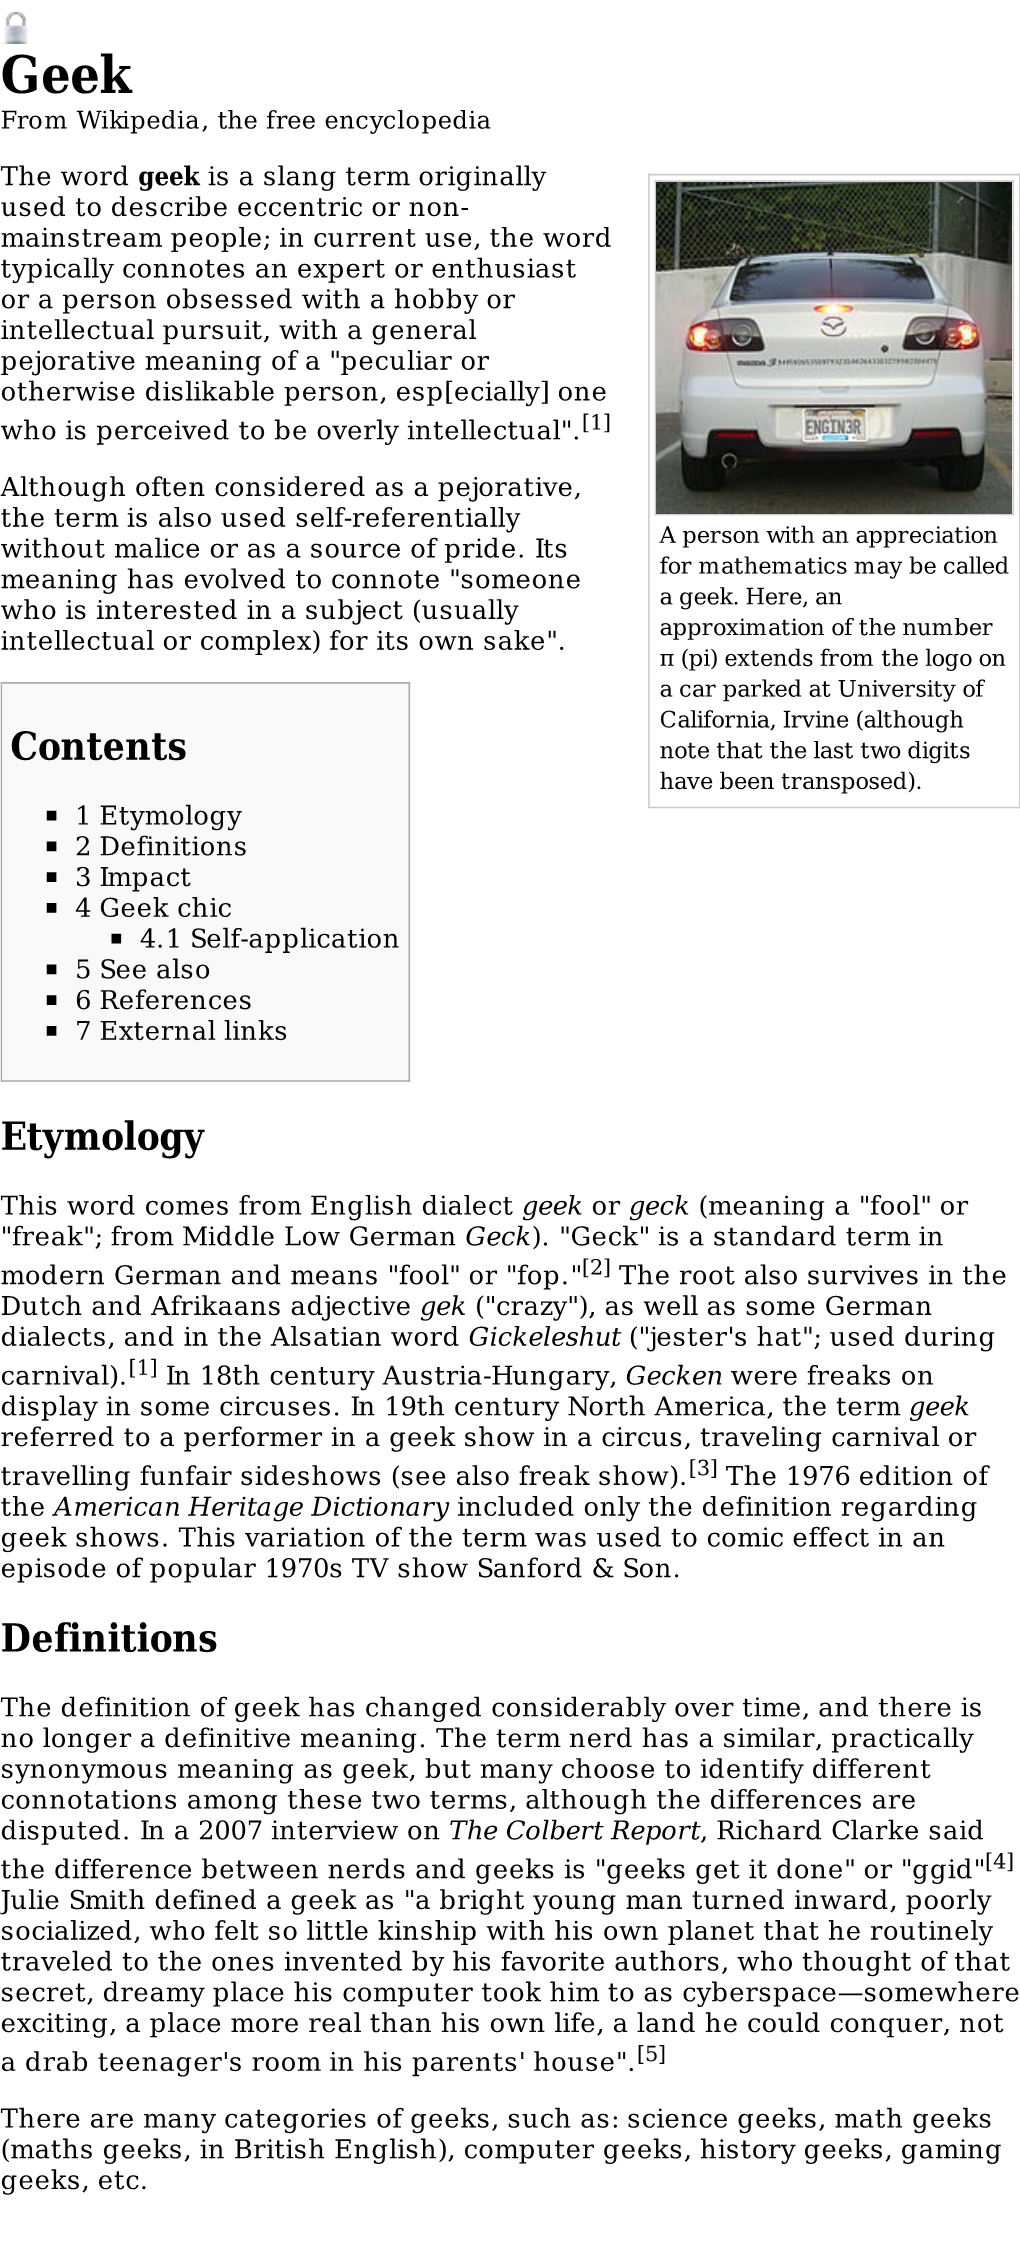 Contents Etymology Definitions